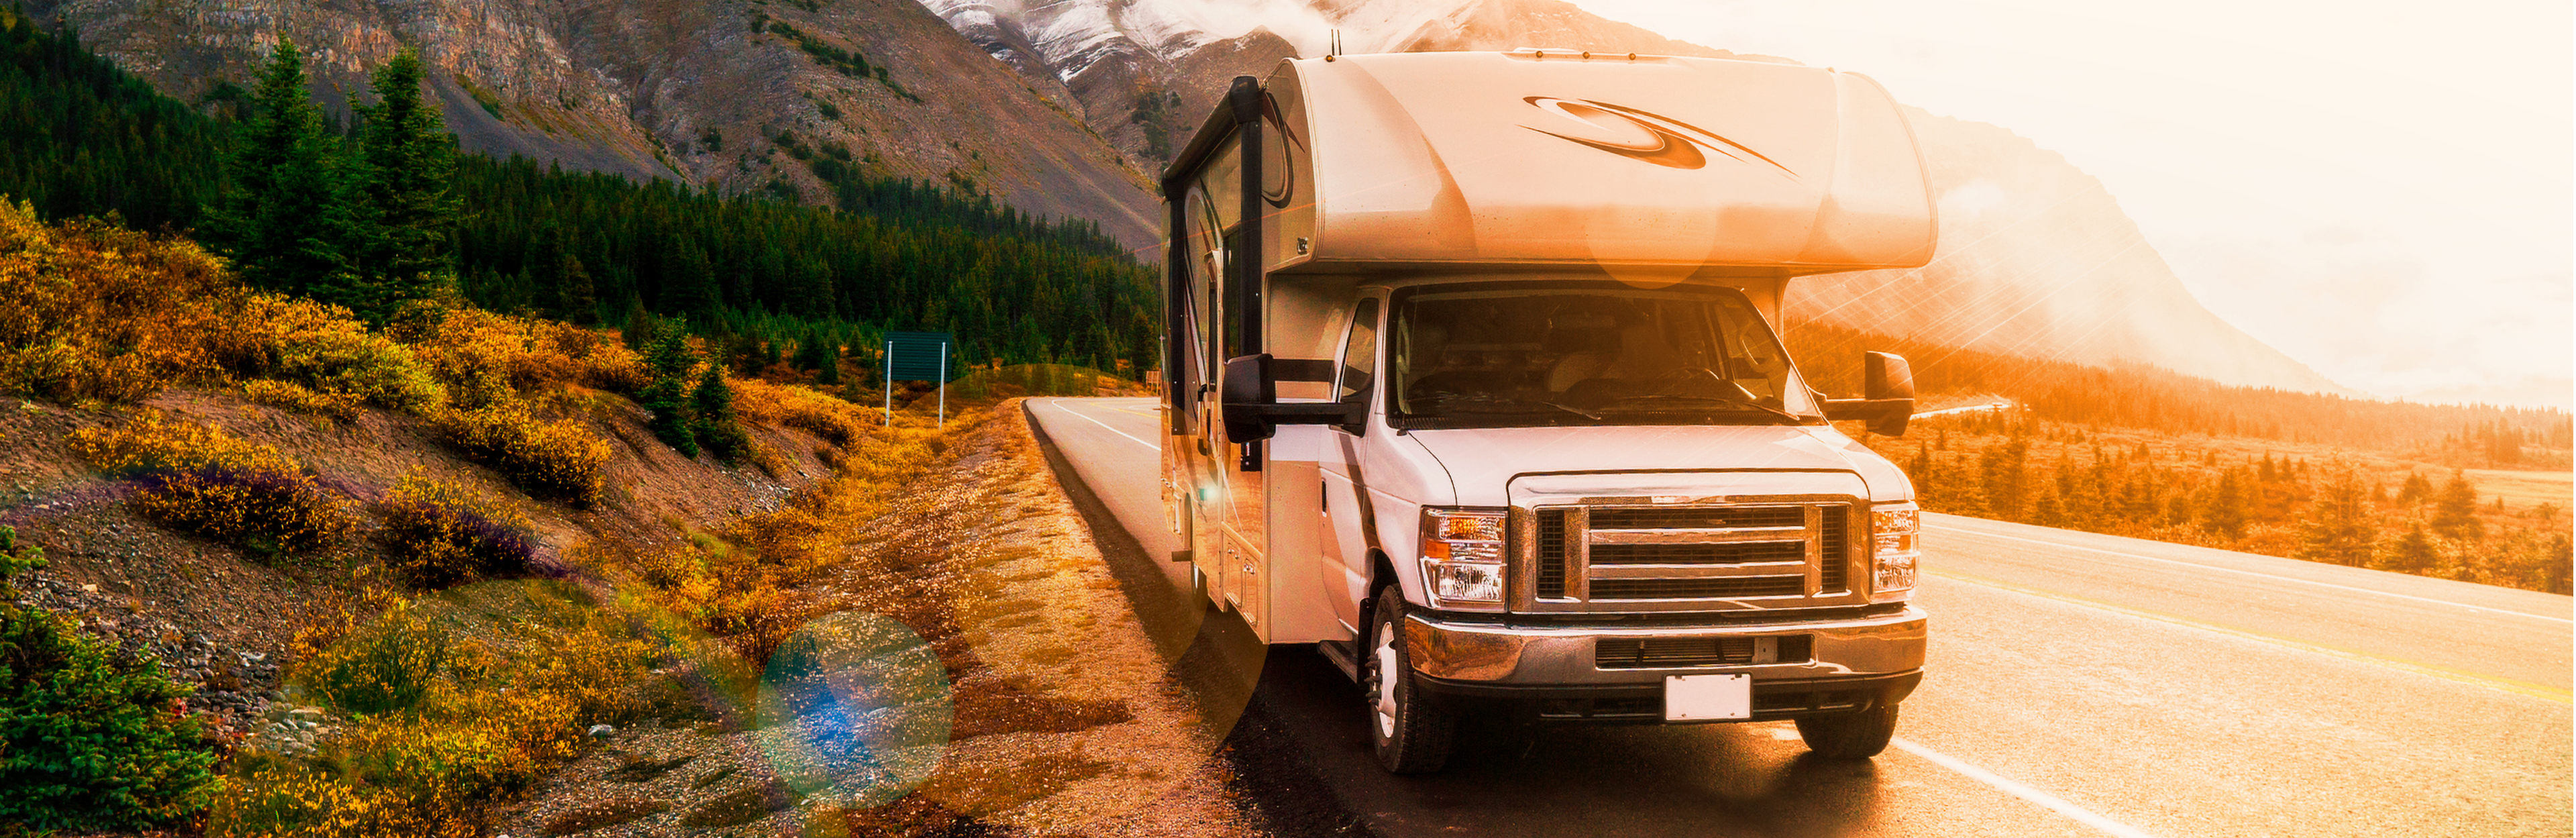 Picture of RV on a sunset road and boreal forest landscape